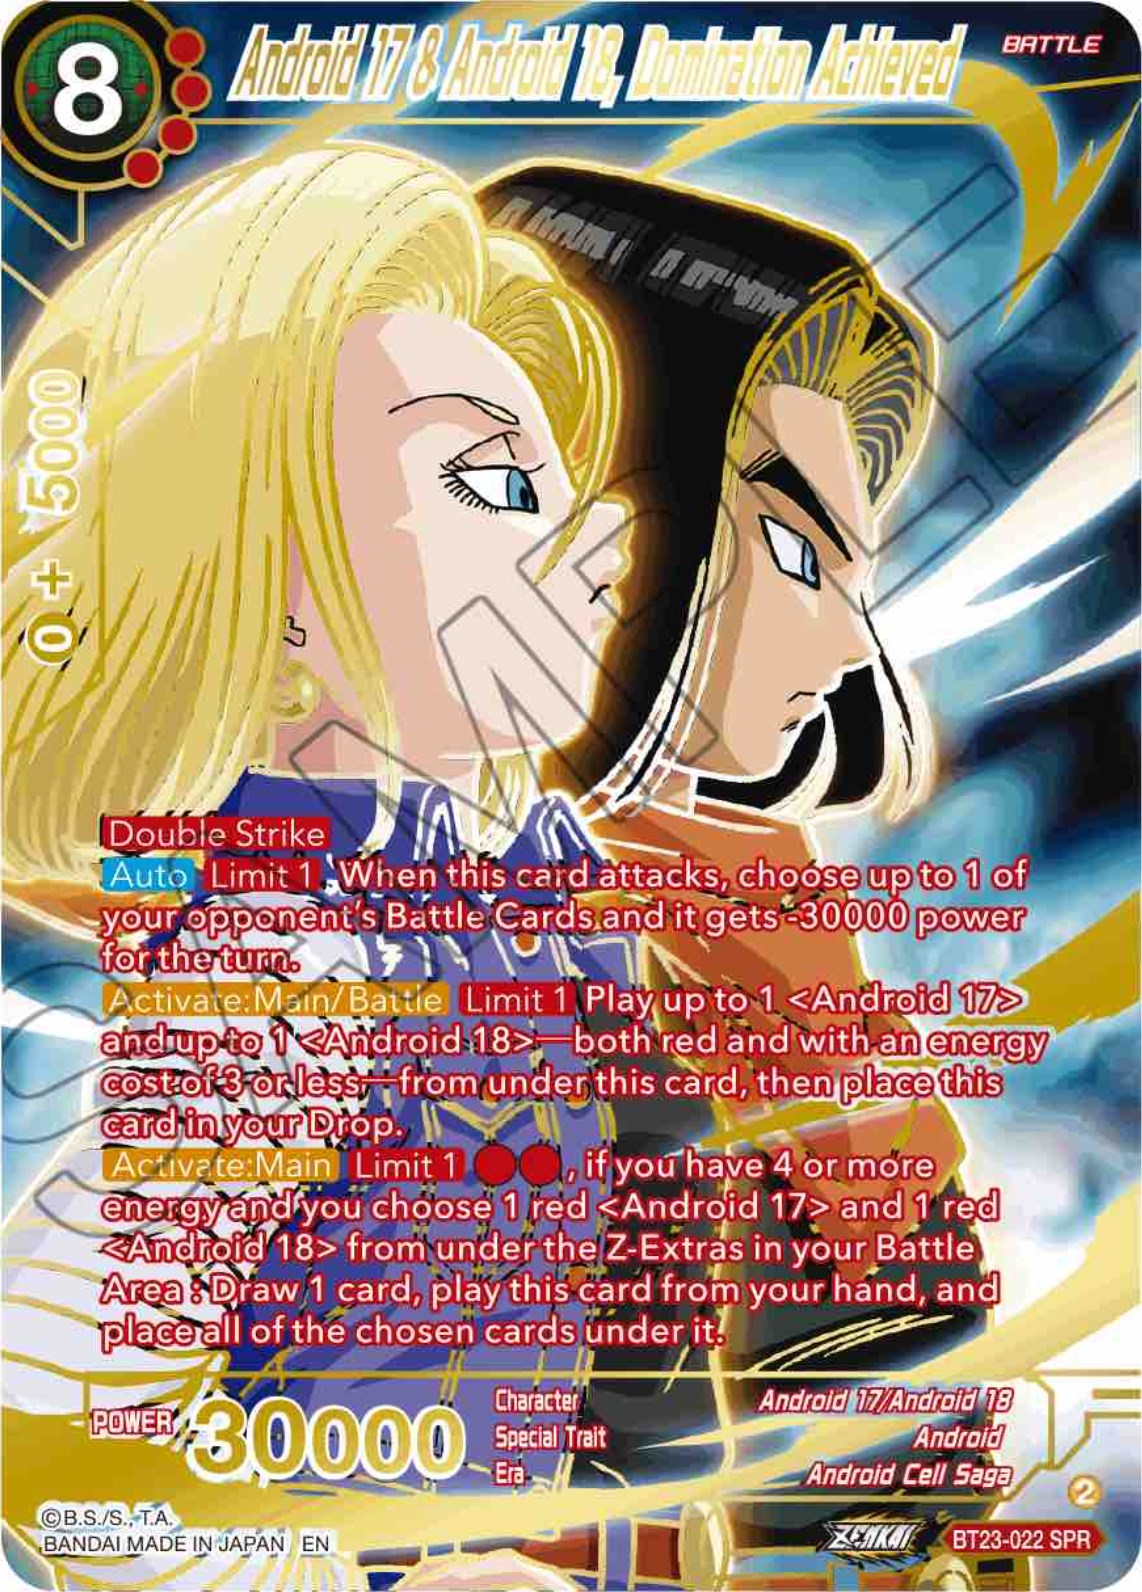 Android 17 & Android 18, Domination Achieved (SPR) (BT23-022) [Perfect Combination] | Devastation Store